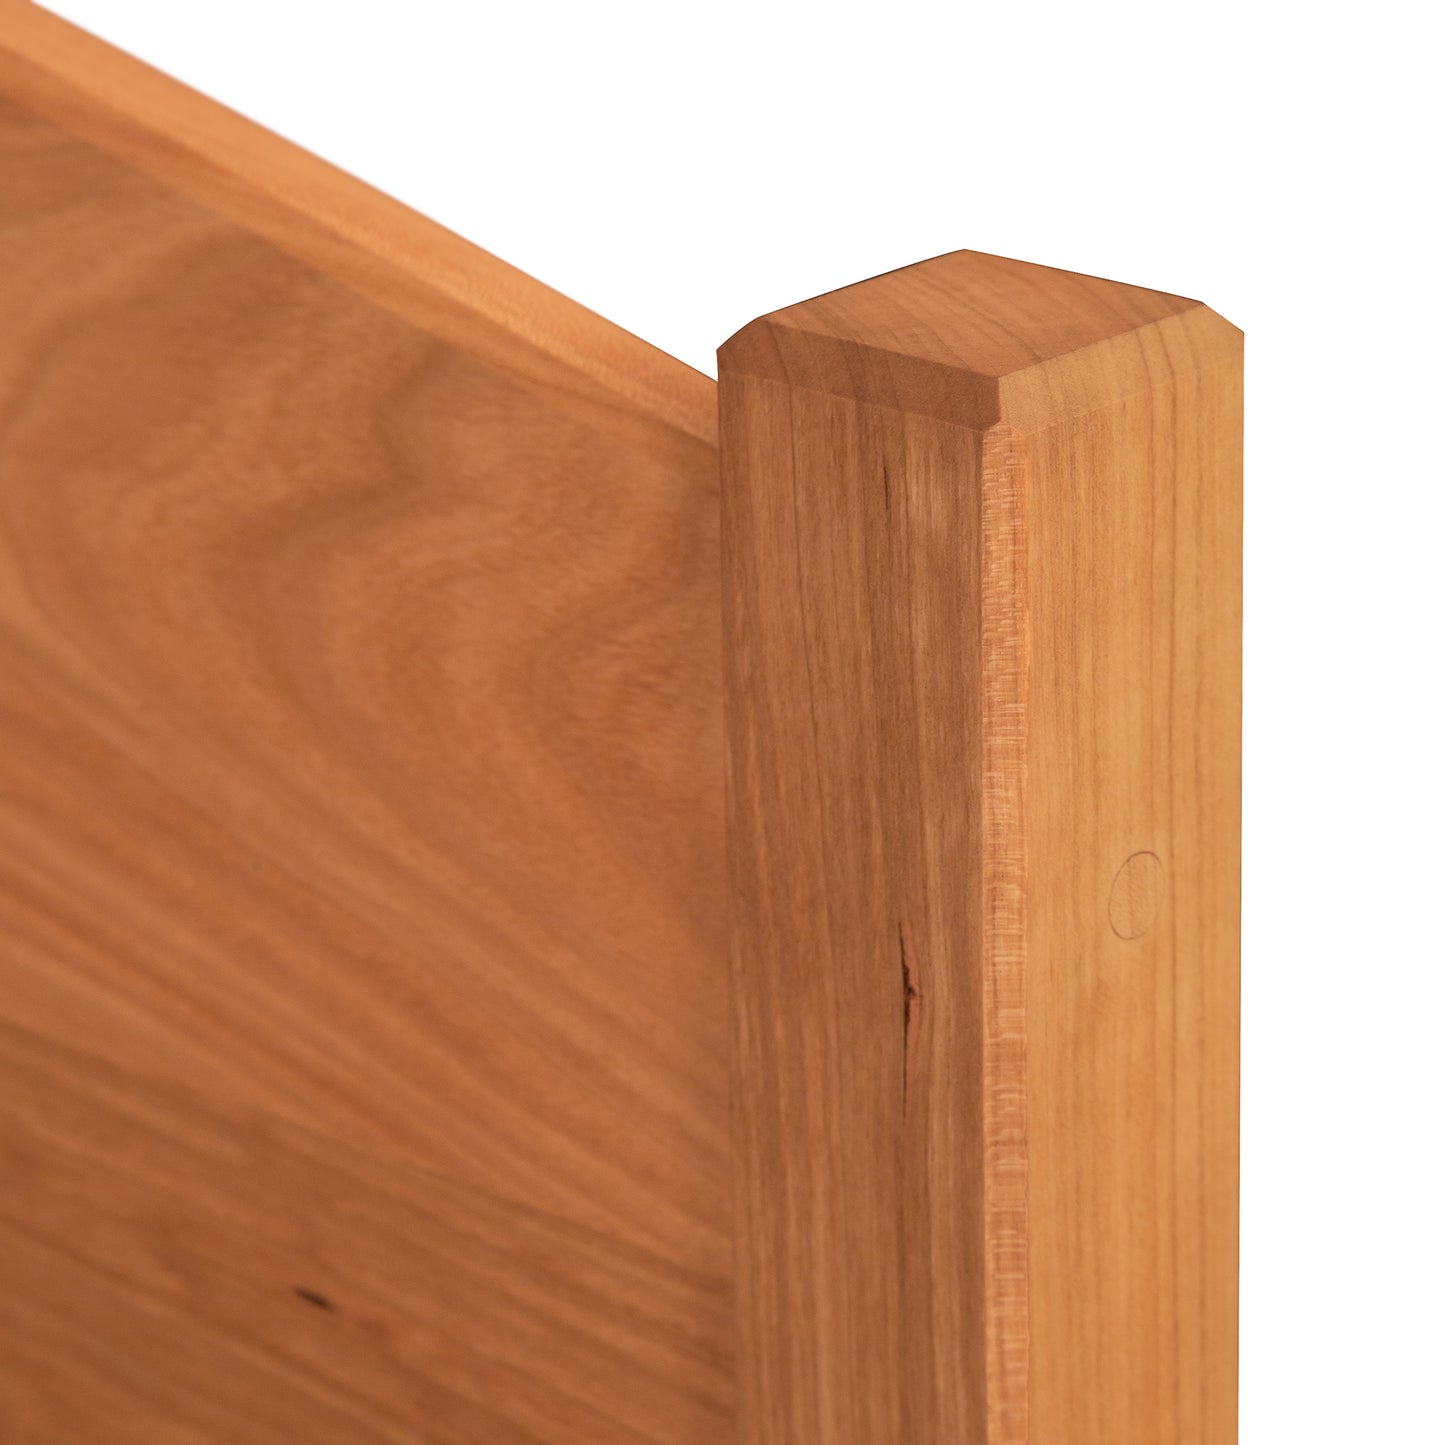 A close up of a wooden bed frame.